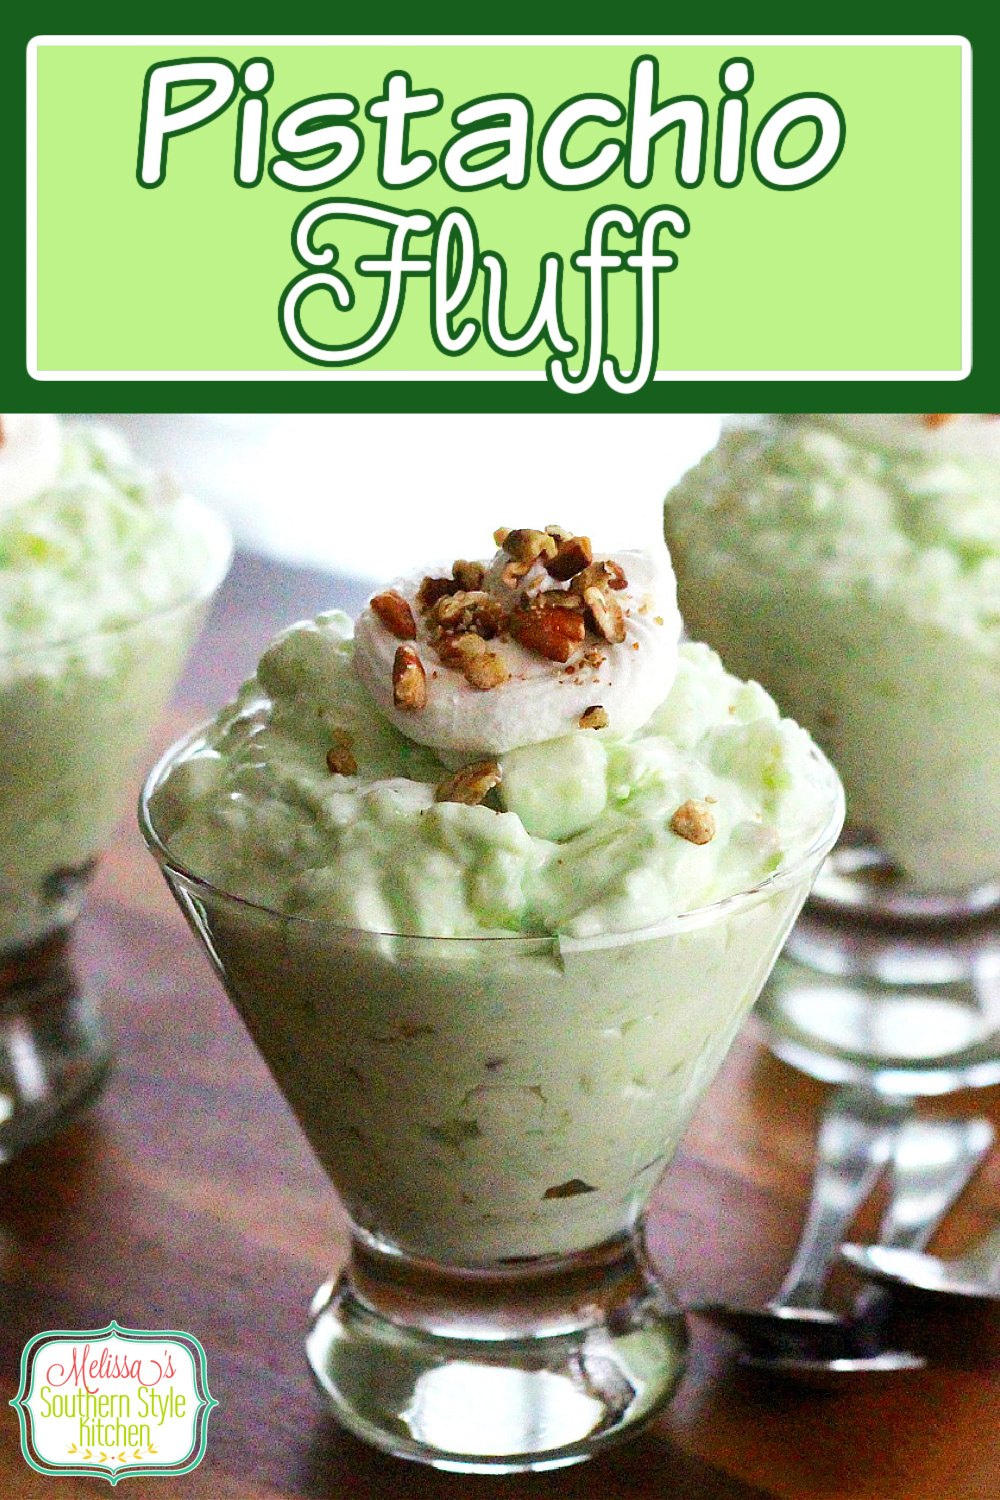 This scrumptious Pistachio Fluff a.k.a. Watergate Salad, is a vintage fruity dessert that you're sure to find yourself making over and over again. #pistachiofluff #fluffrecipes #watergatesalad #nobakedesserts #pistachio #holidayrecipes #desserts #dessertfoodrecipes #southernfood #southernrecipes via @melissasssk